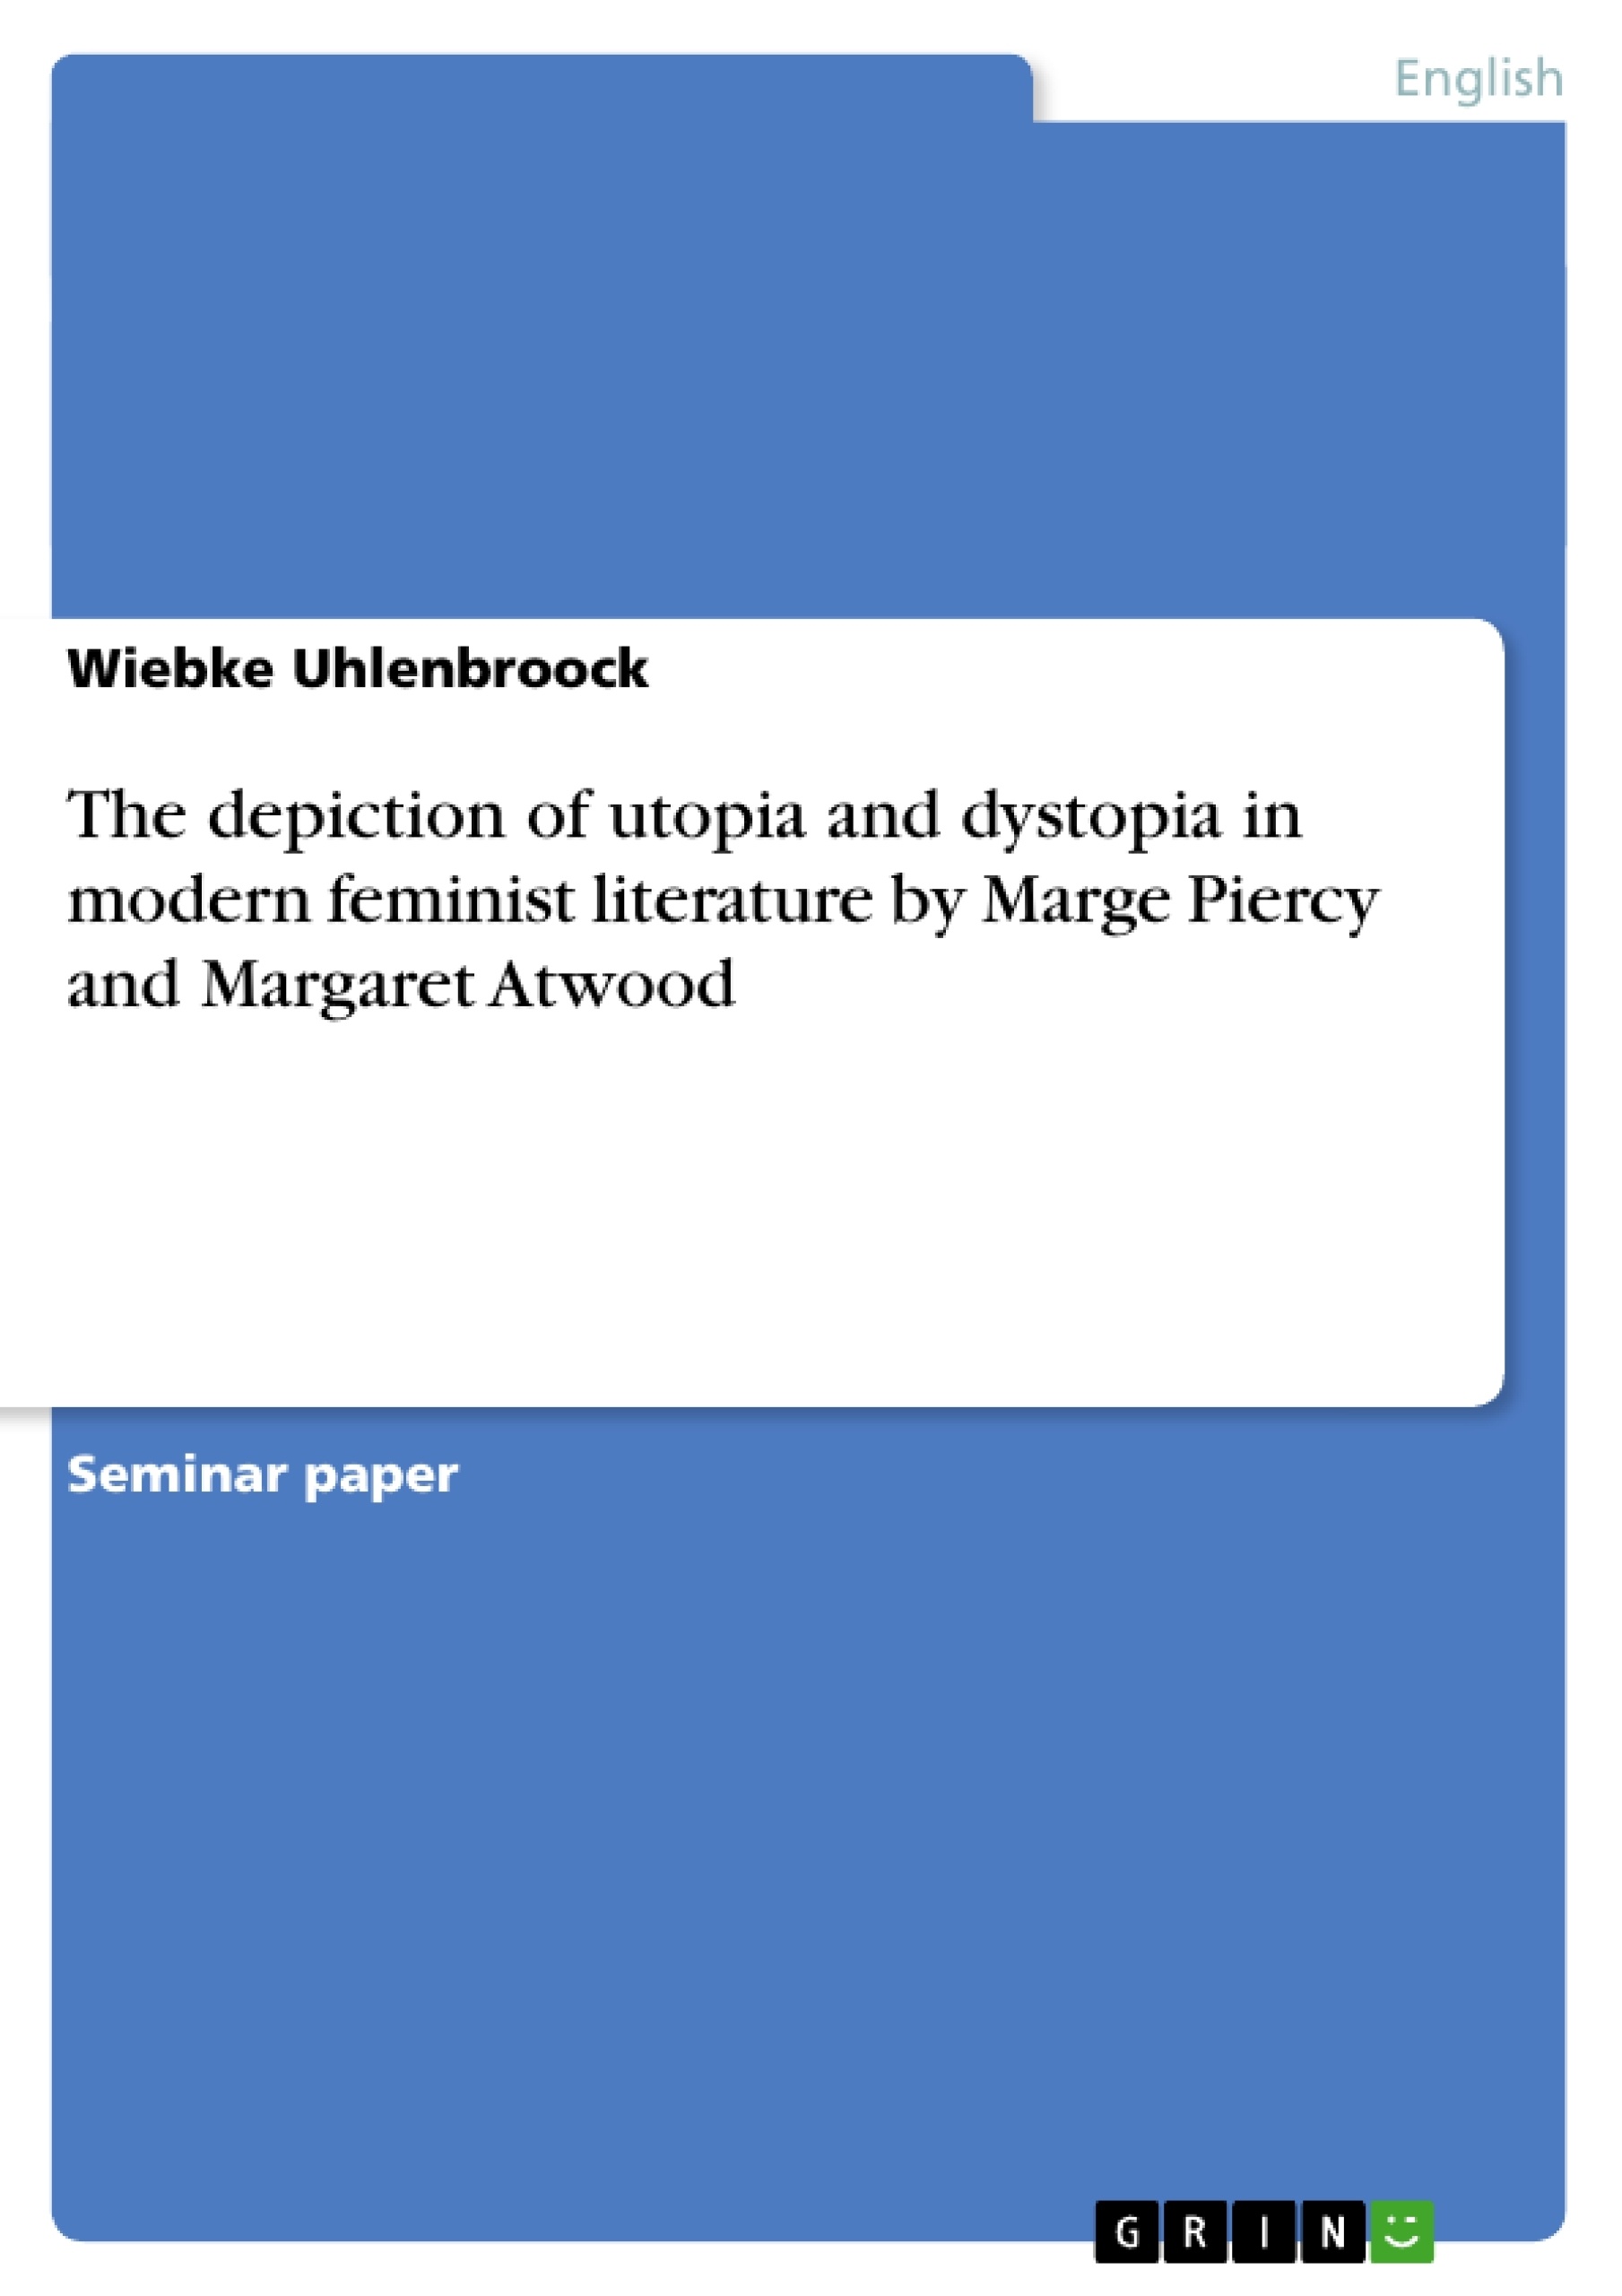 Title: The depiction of utopia and dystopia in modern feminist literature by Marge Piercy and Margaret Atwood